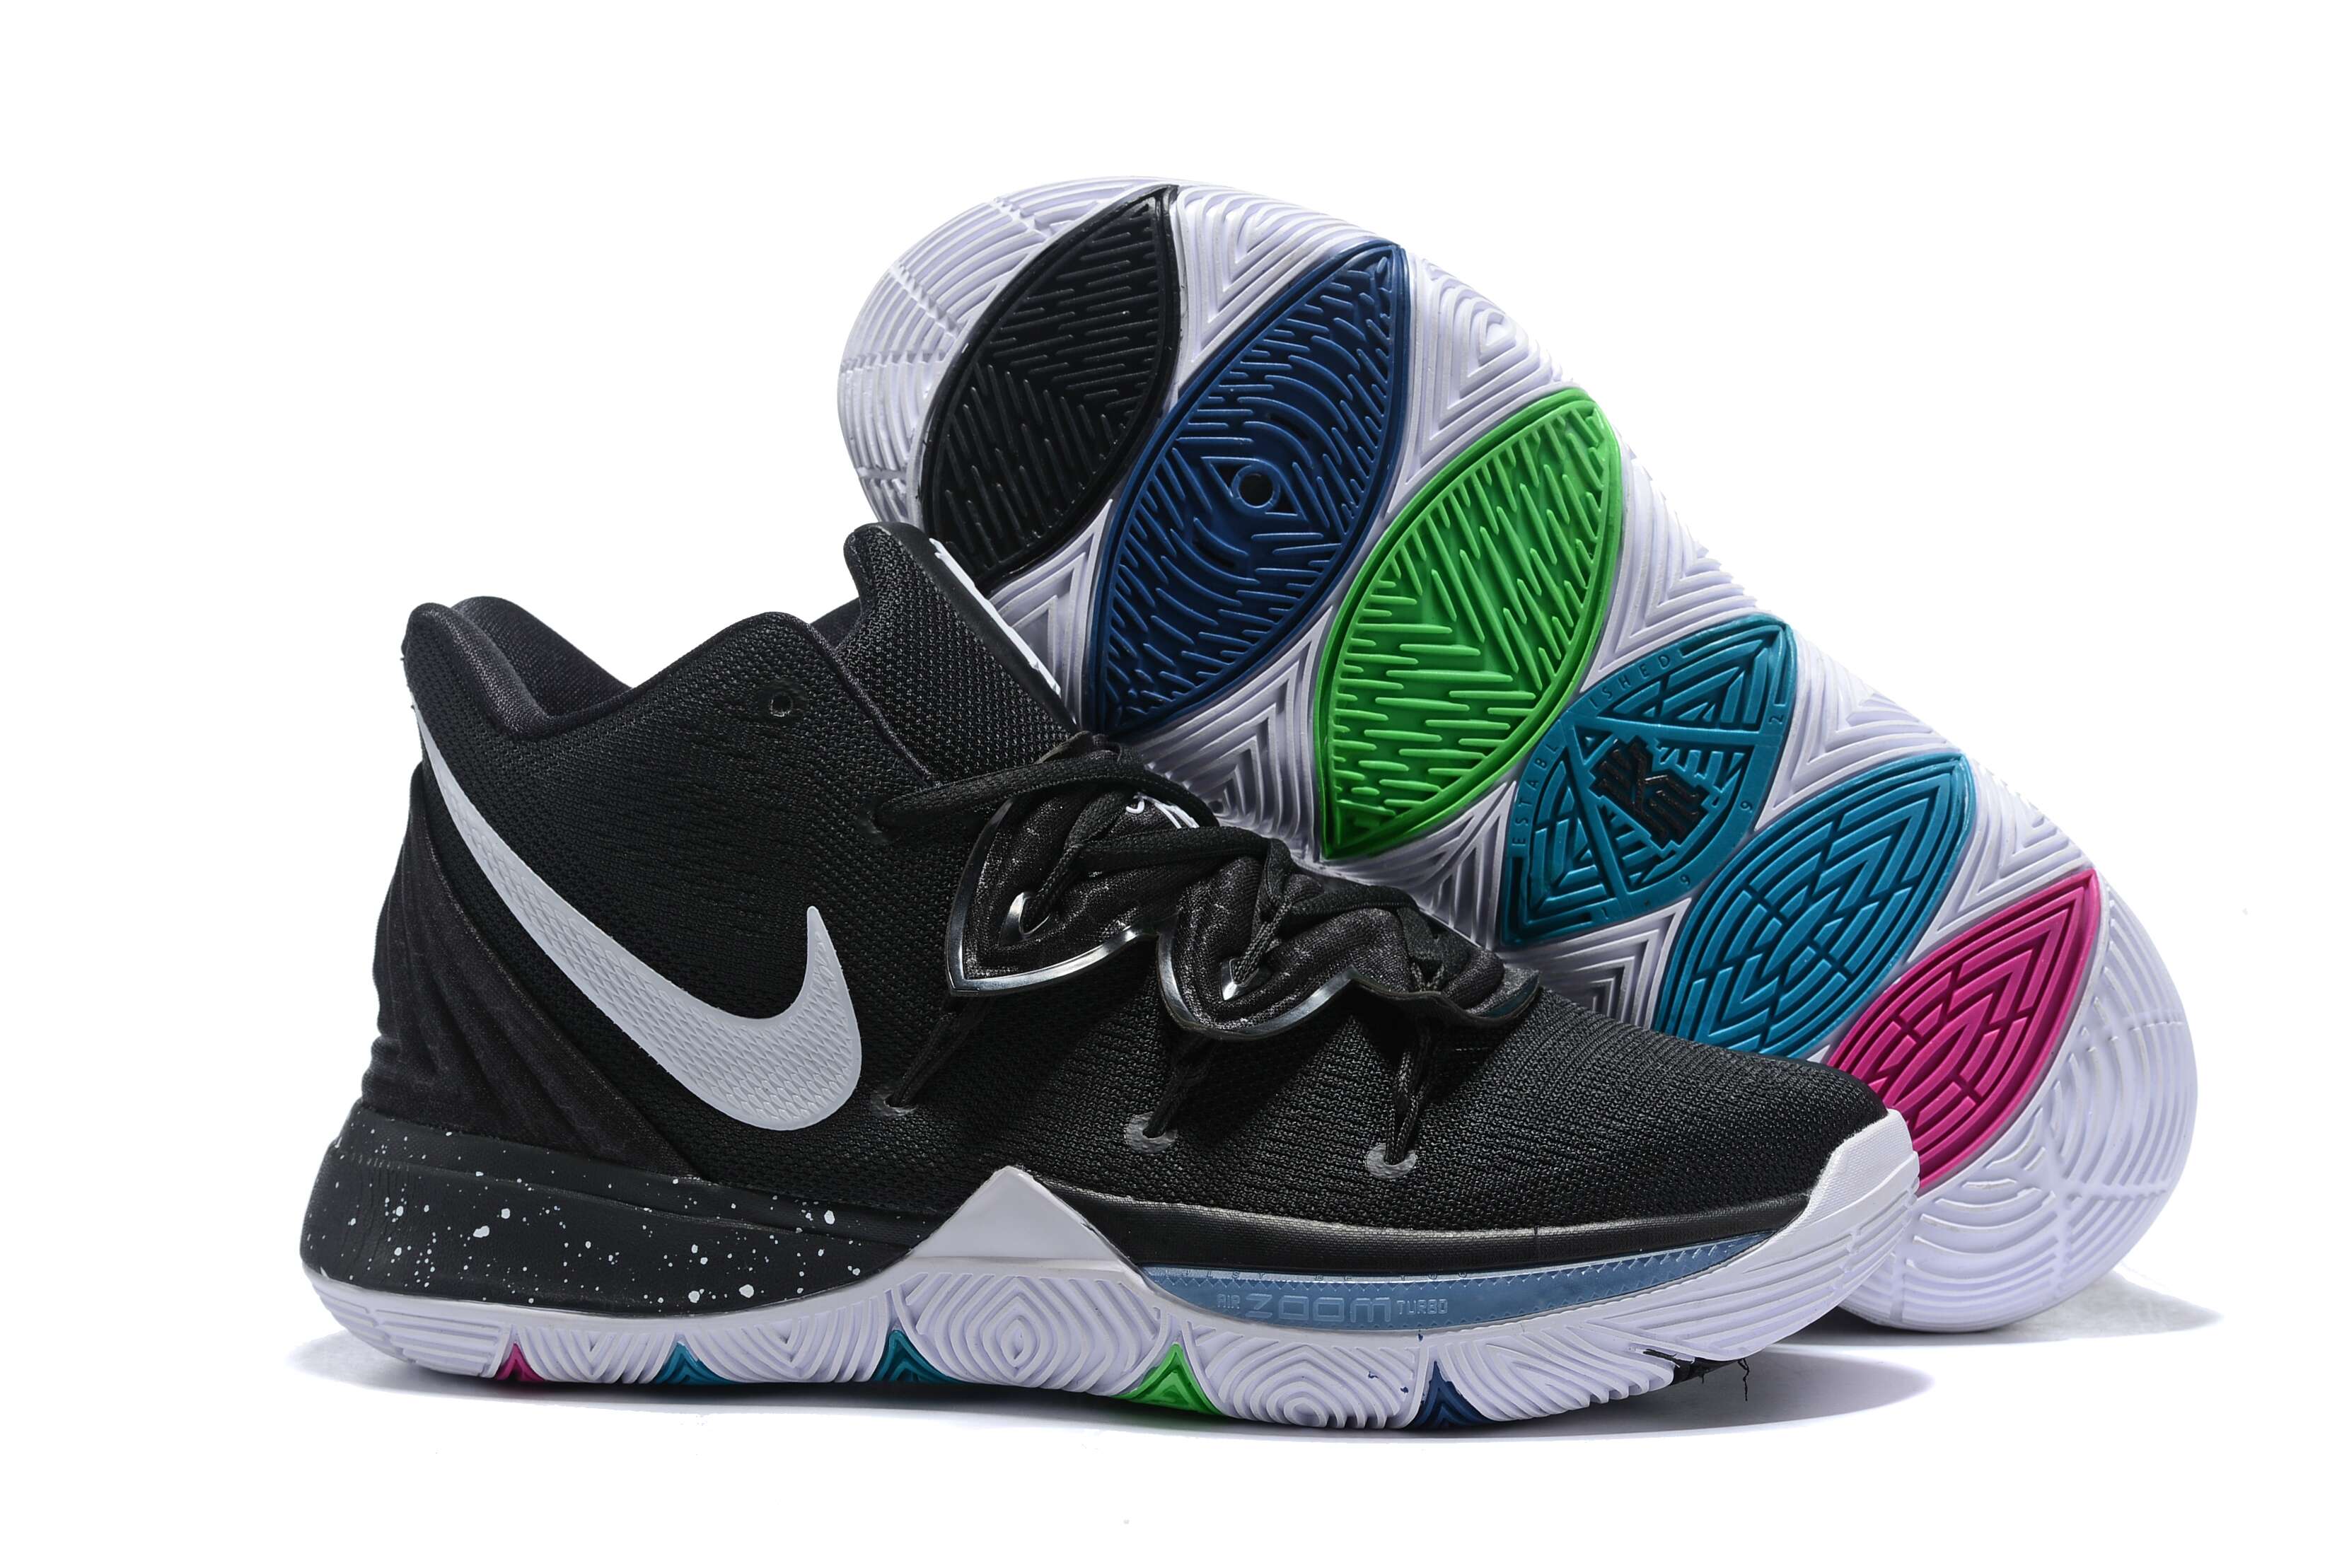 Women's Running weapon Super Quality Kyrie 5 shoes 010